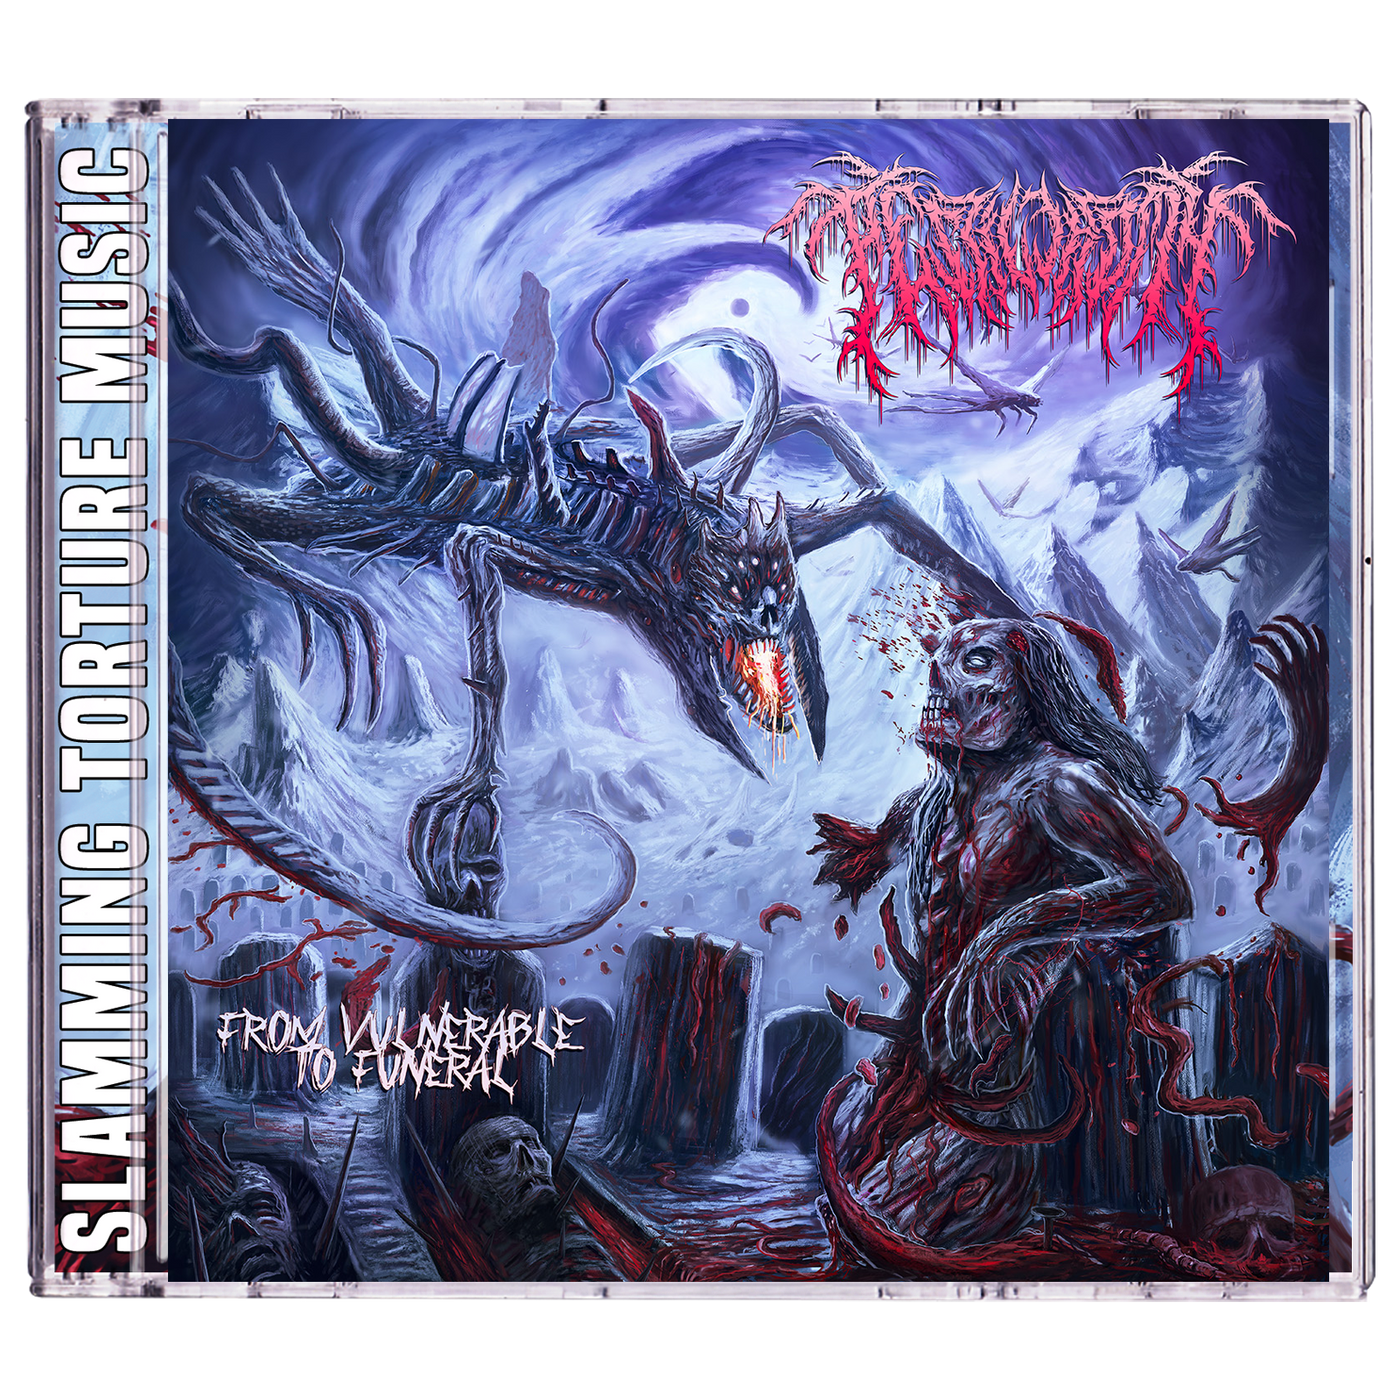 Pestilectomy 'From Vulnerable To Funeral' CD